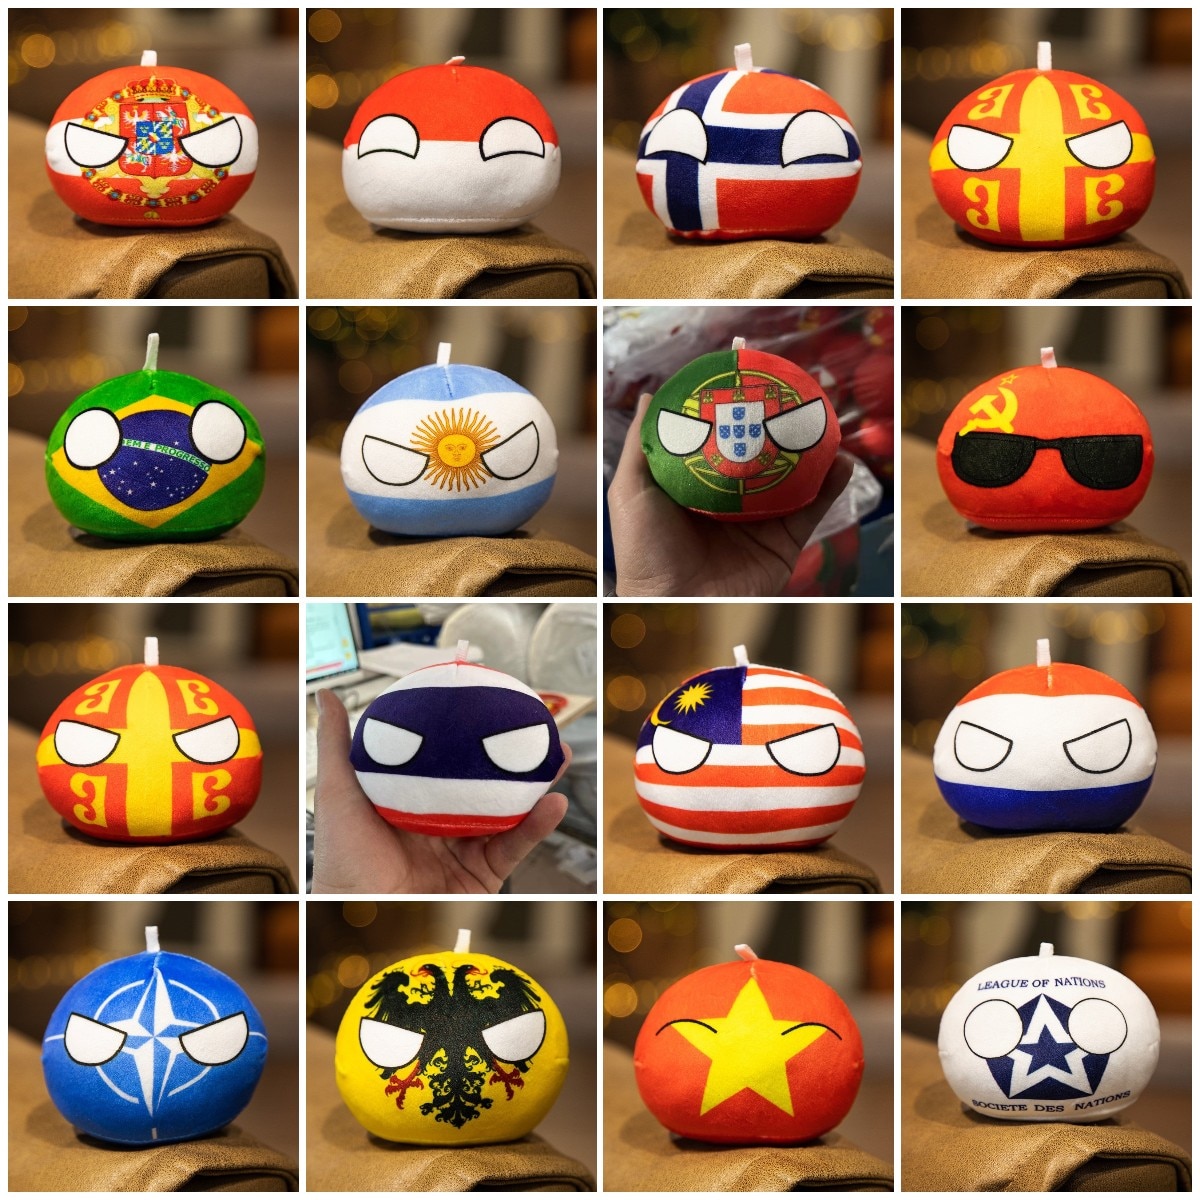 50styles 10cm Country Ball Plush Toy Polandball Plushie Countryball Spain USA Argentina FRANCE RUSSIA UK Gifts - Countryball Plush